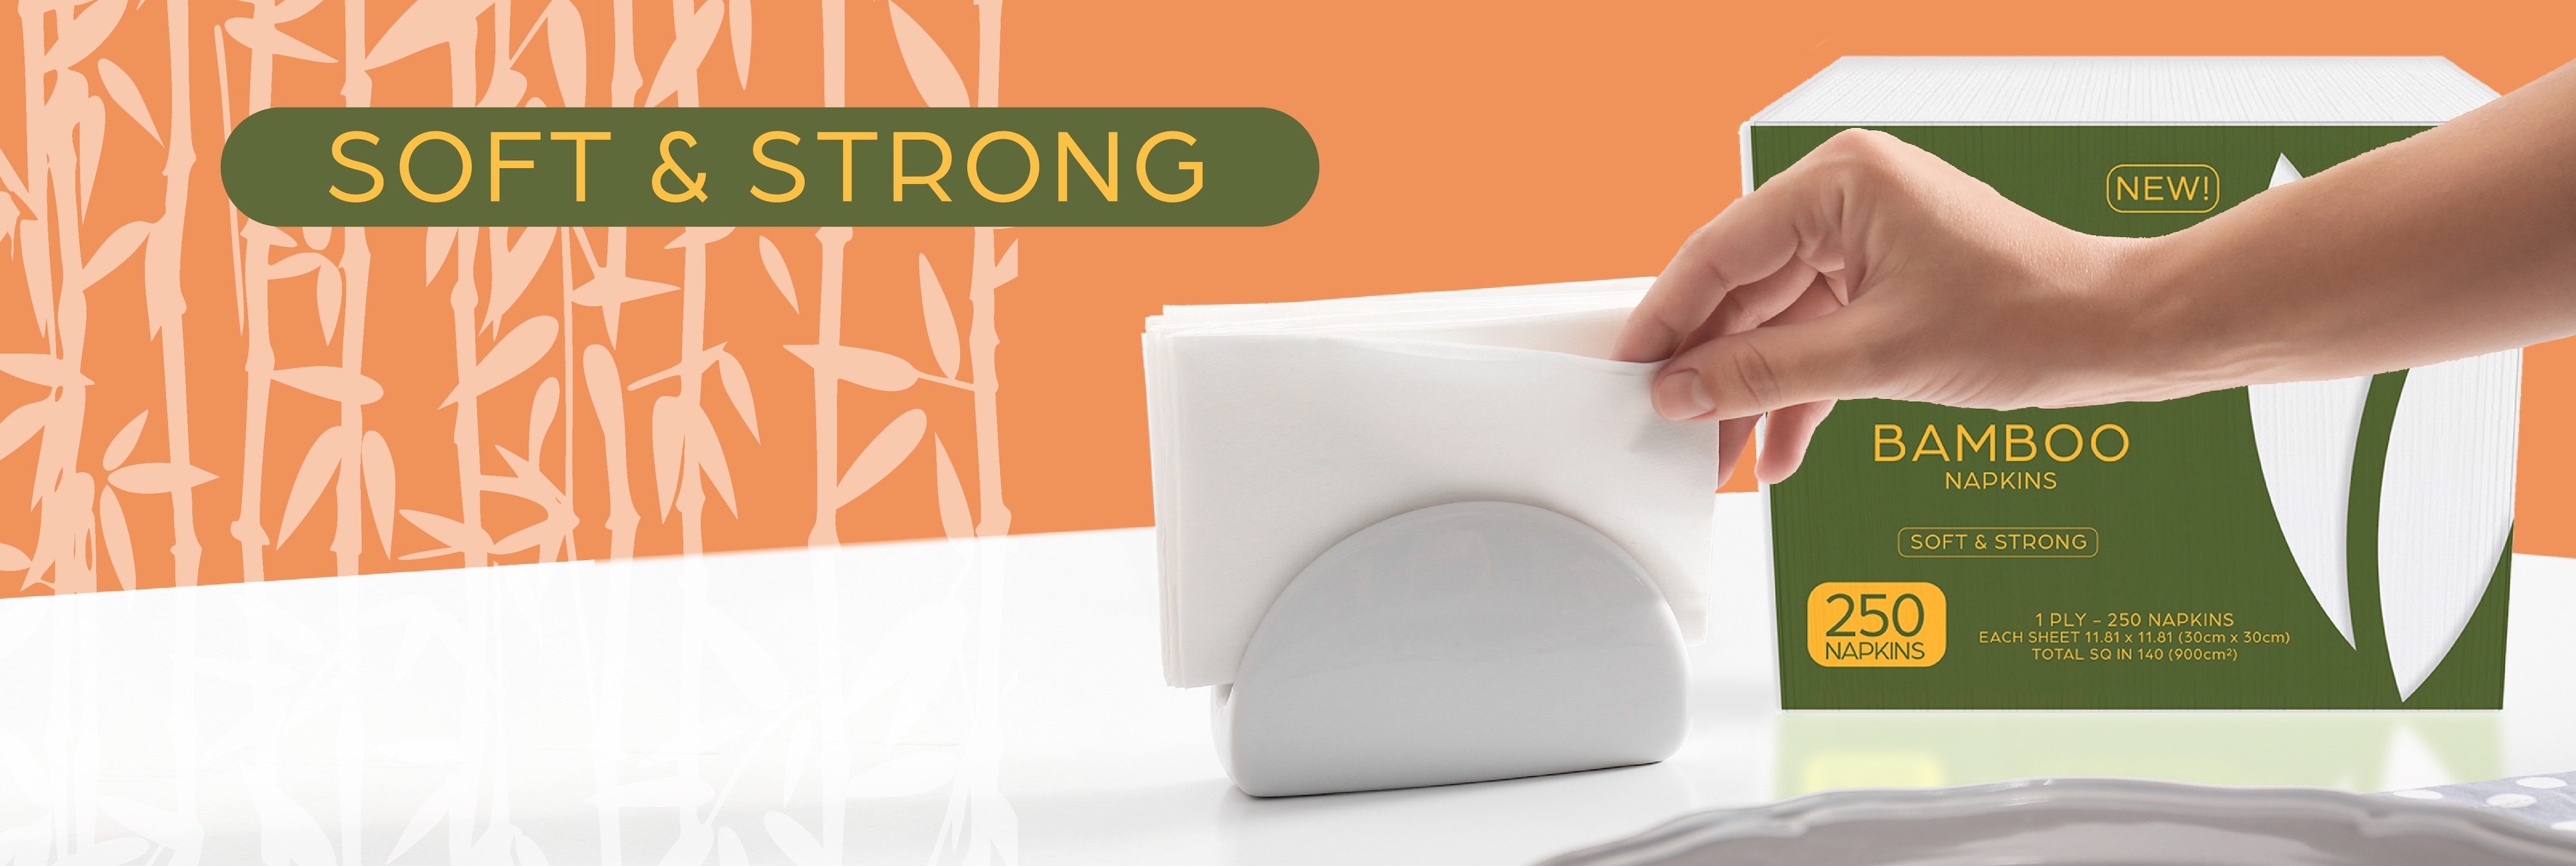 Soft and Strong. Shop Now.